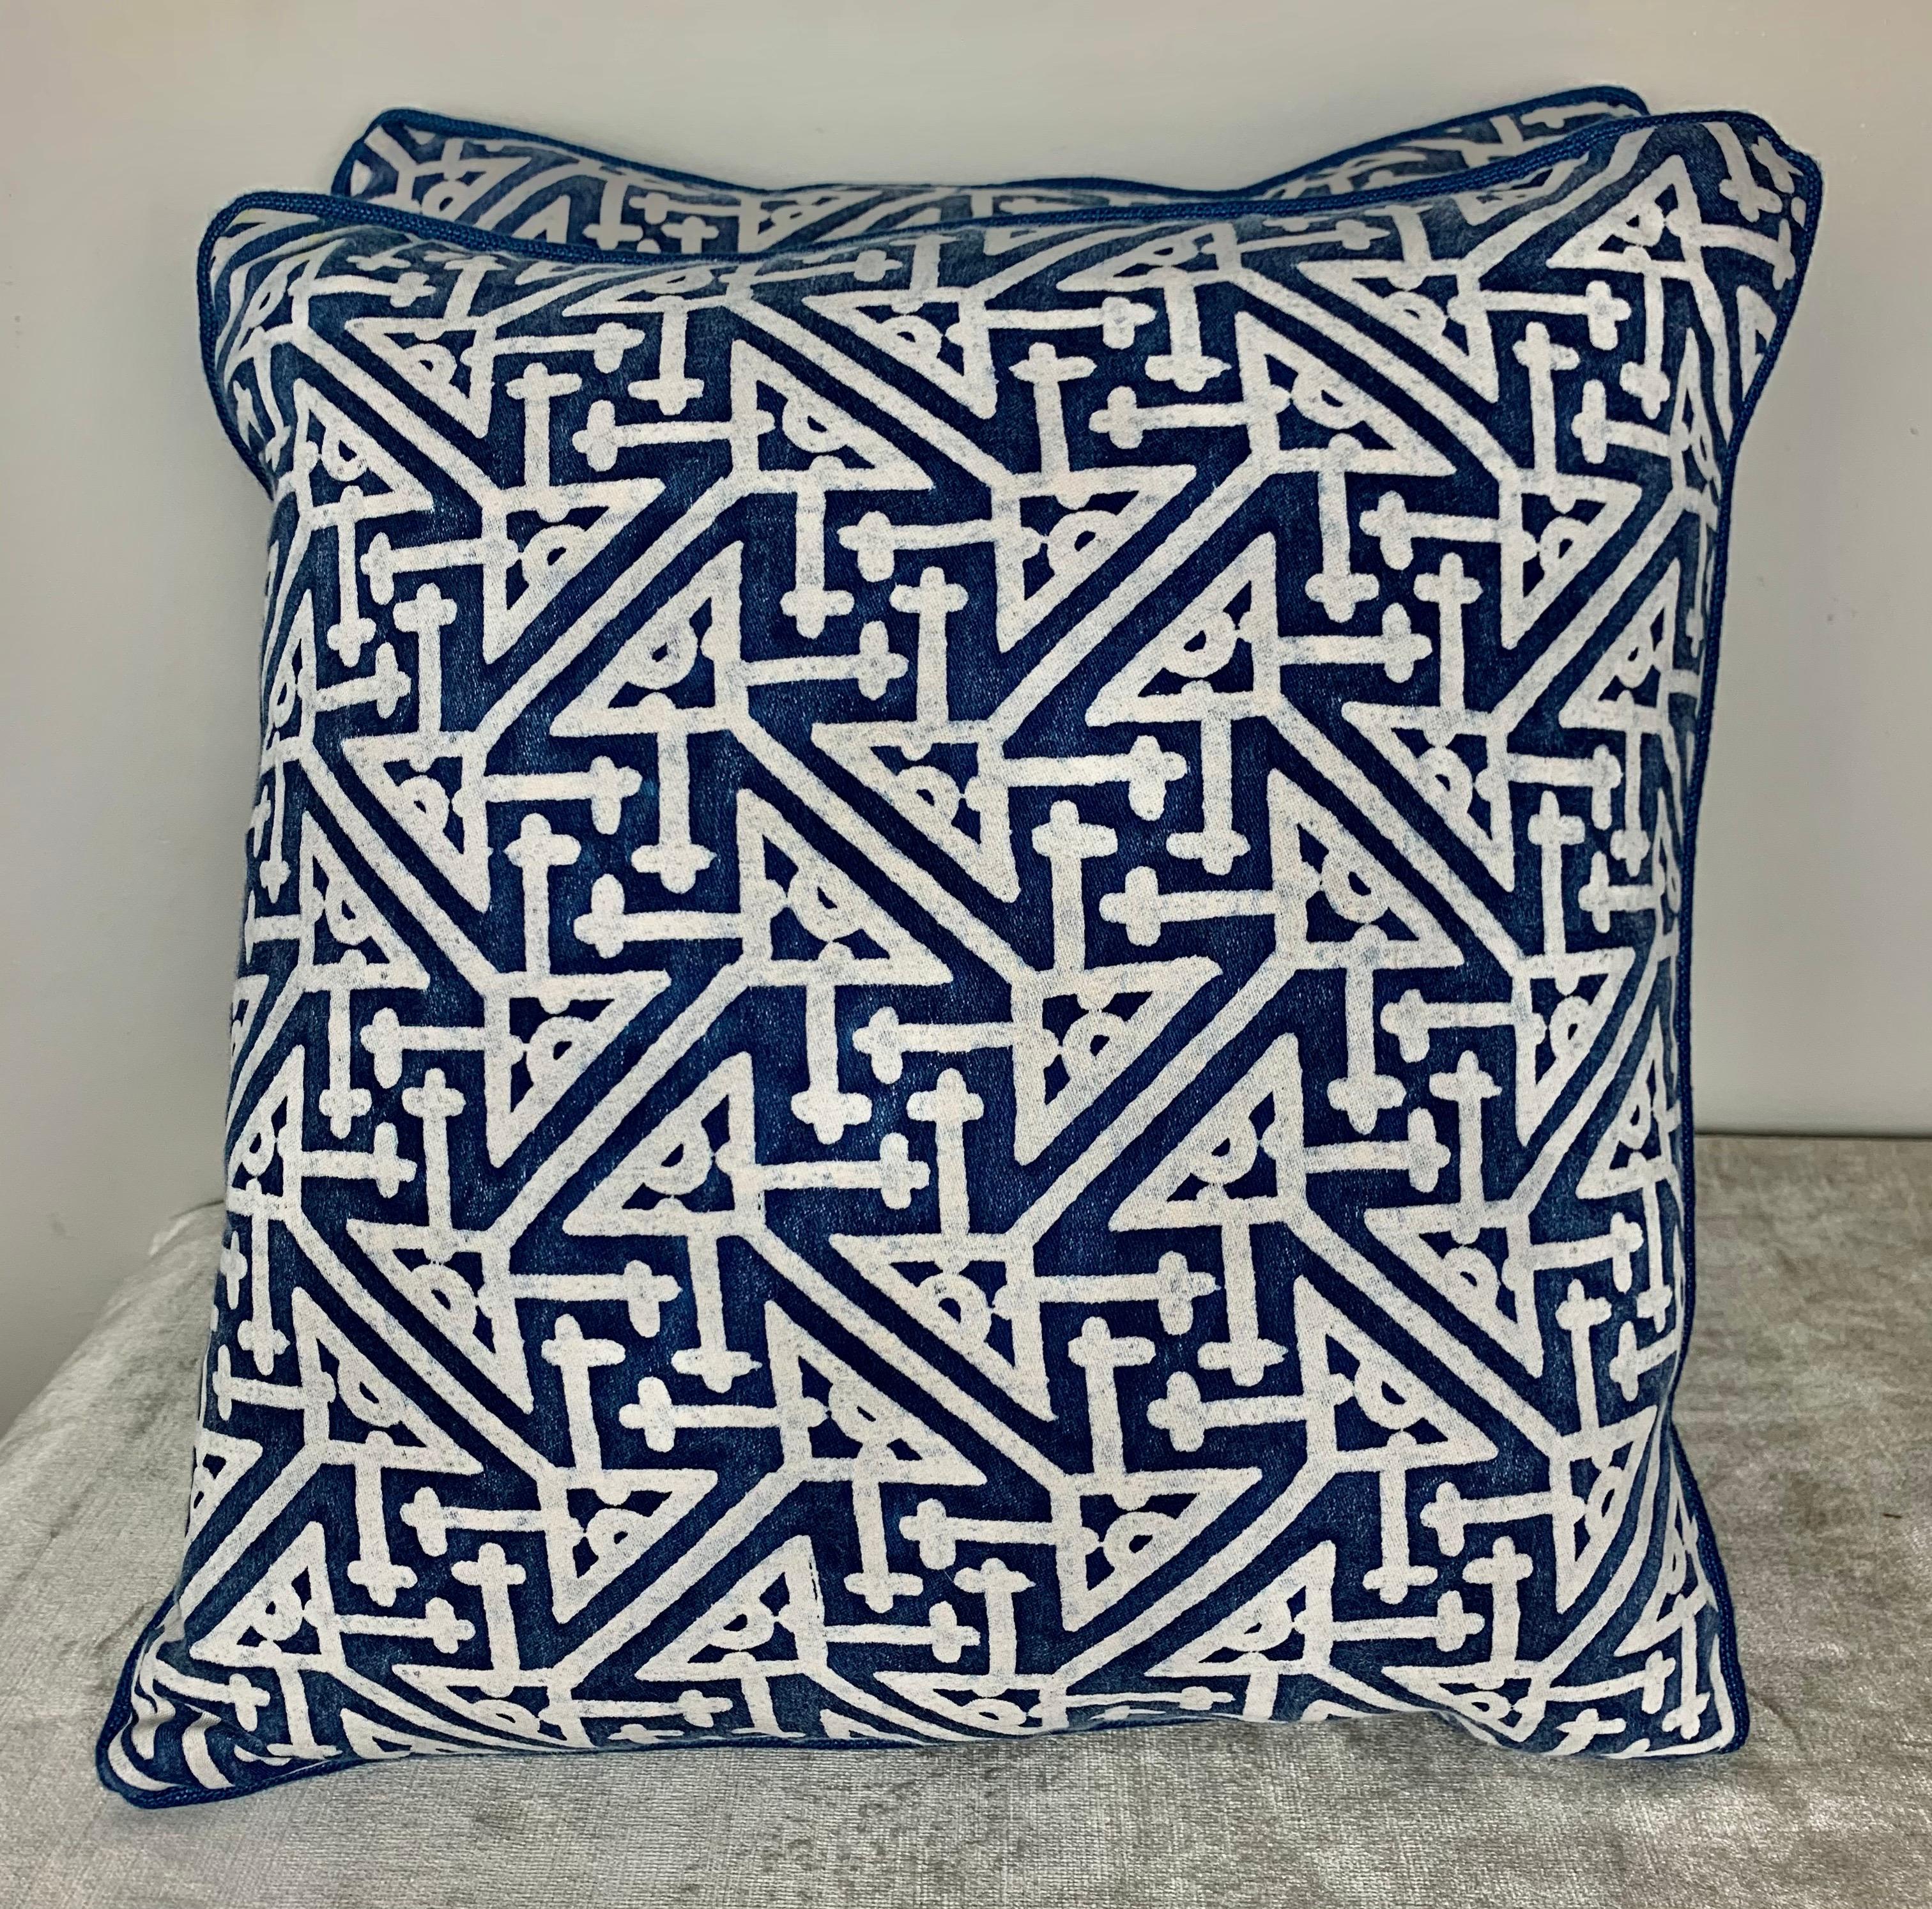 Pair of pillow made with vintage blue and white printed Fortuny cotton fronts and dark blue linen backs. Self-cord detail, down inserts, sewn closed.